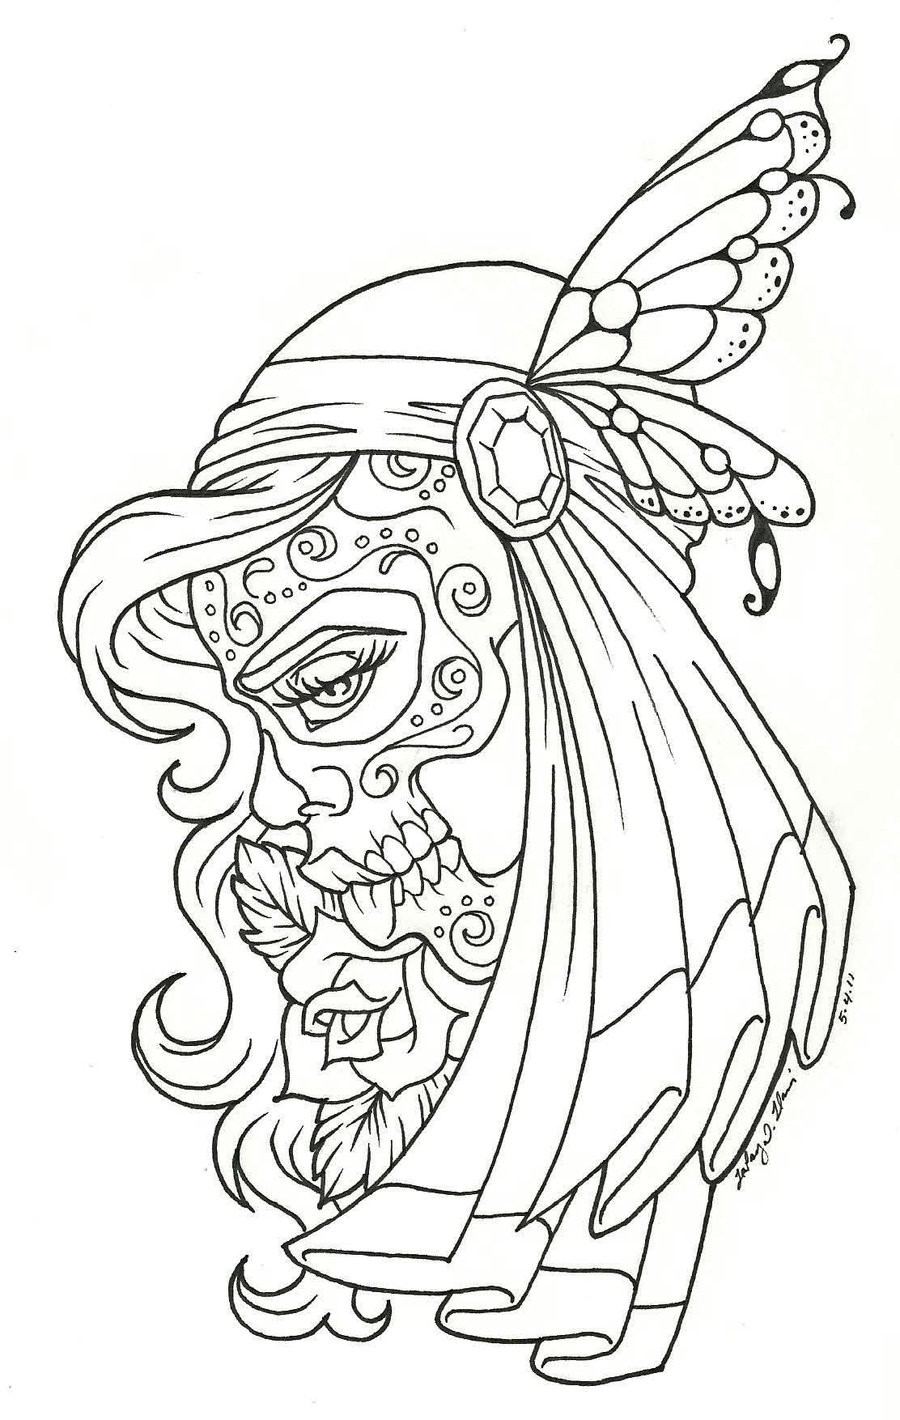 Free Printable Day of the Dead Coloring Pages Best